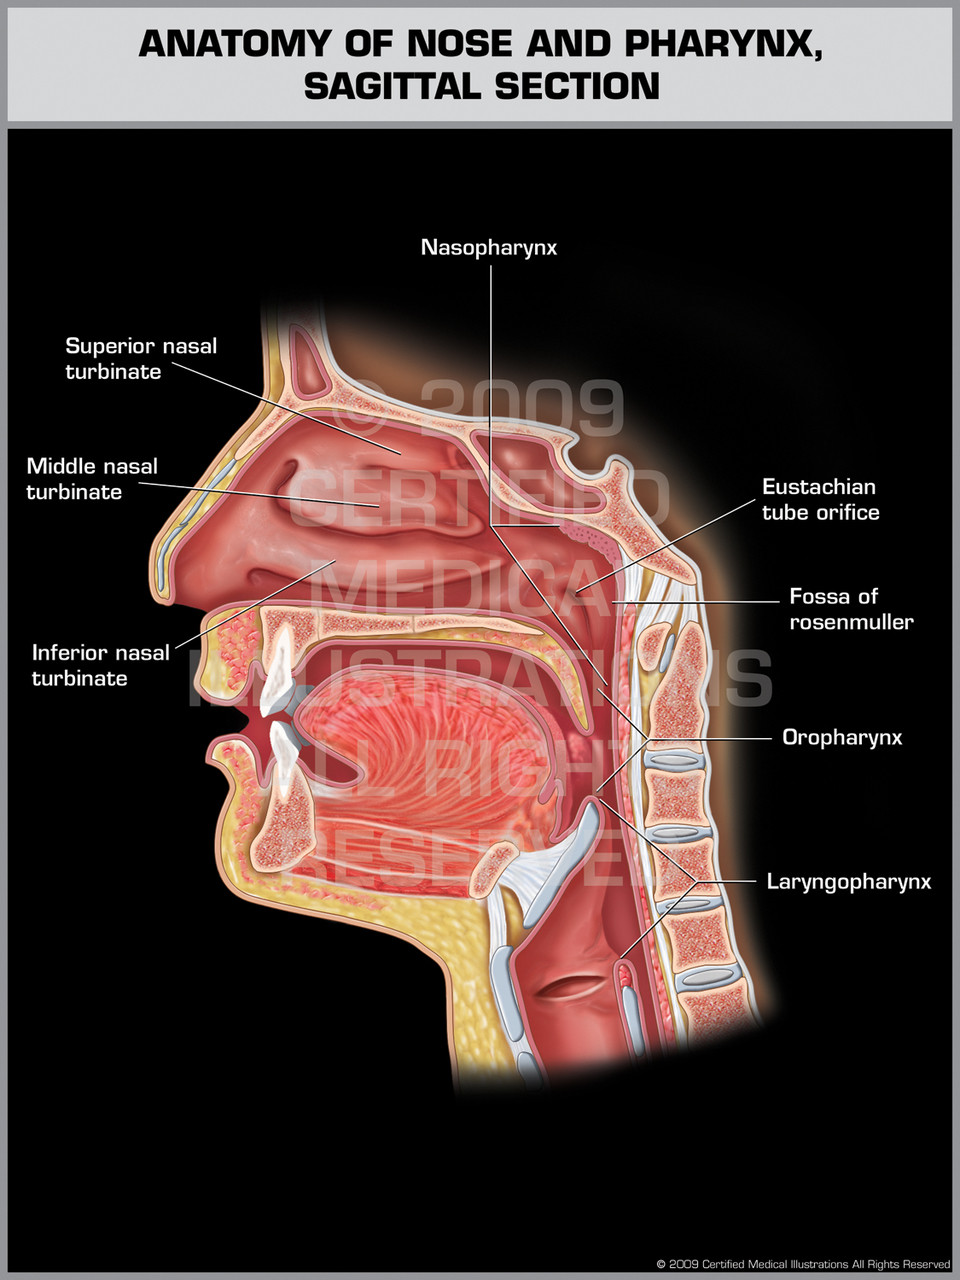 Anatomy of Nose and Pharynx, Sagittal Section